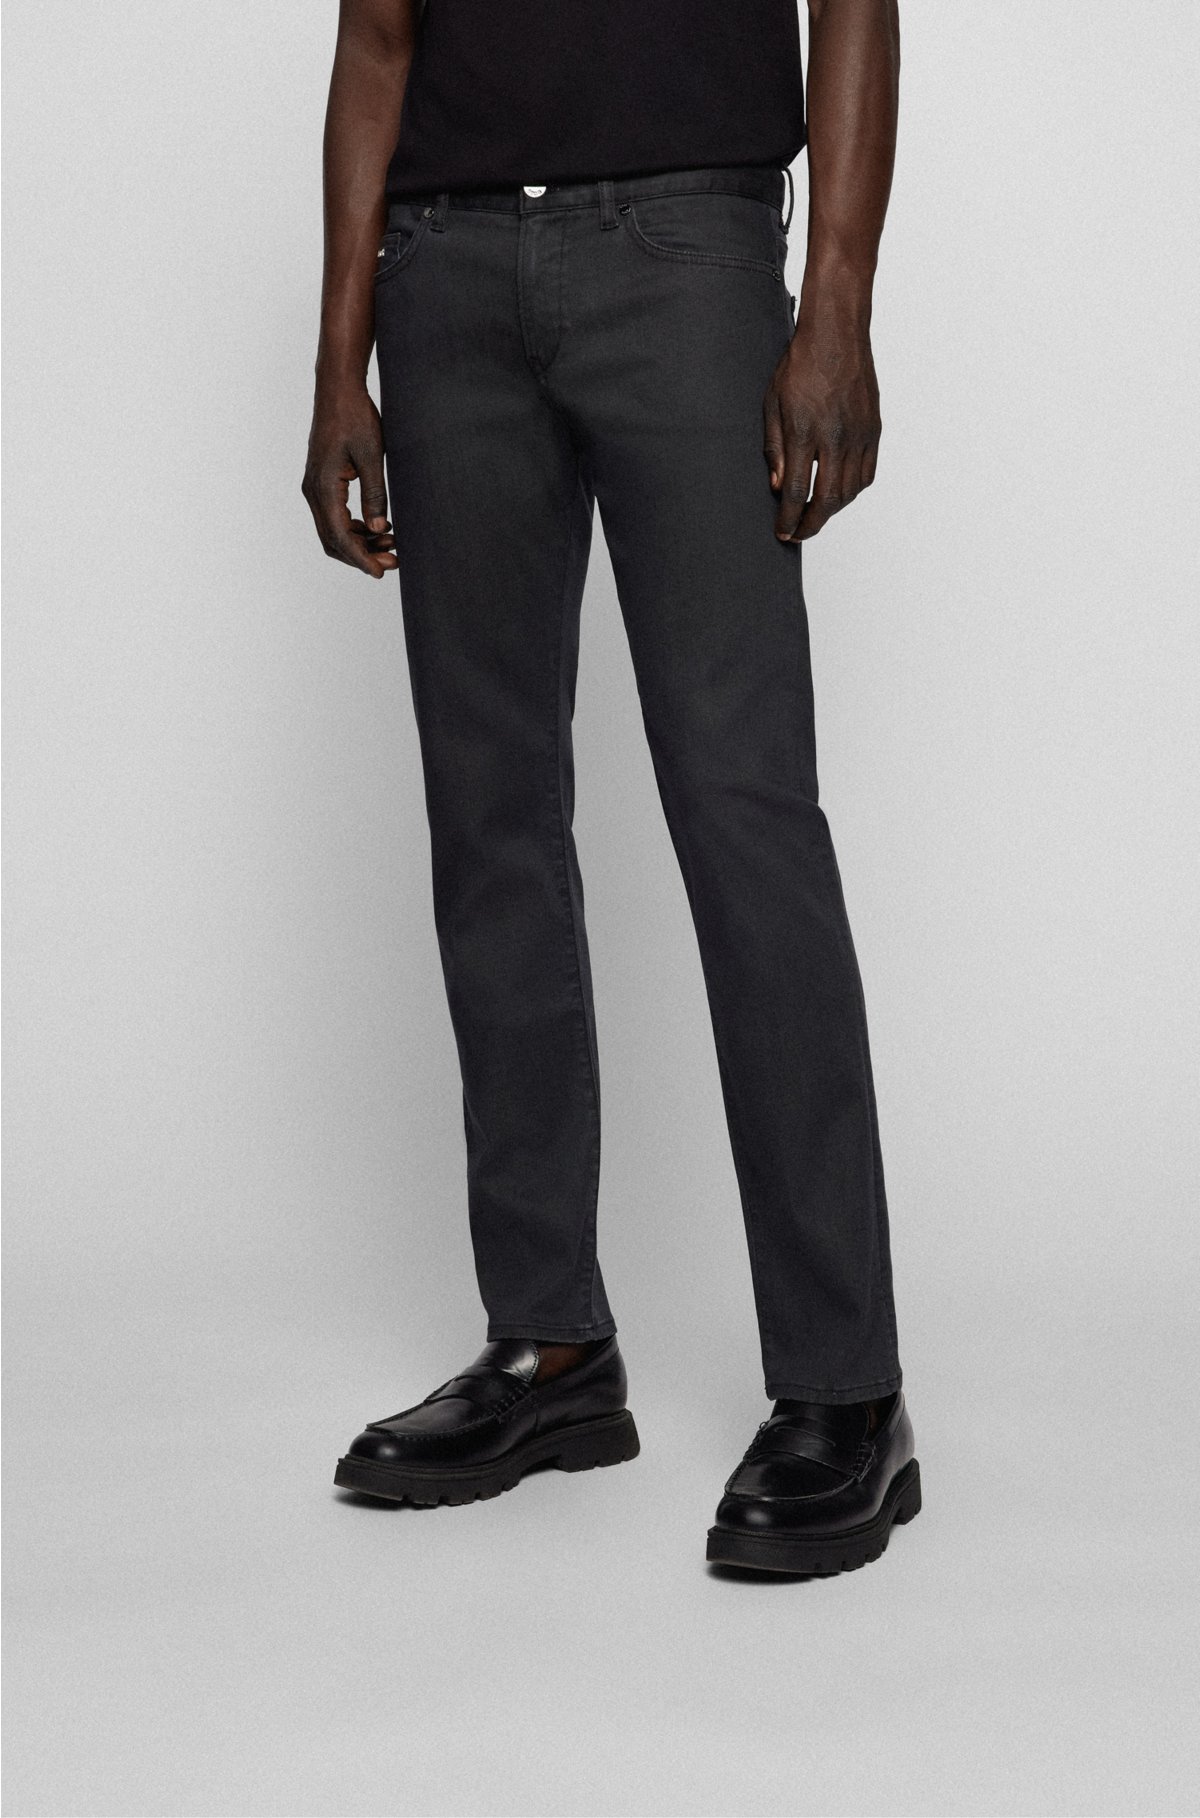 Charcoal Grey Power-Stretch Slim Fit Jeans